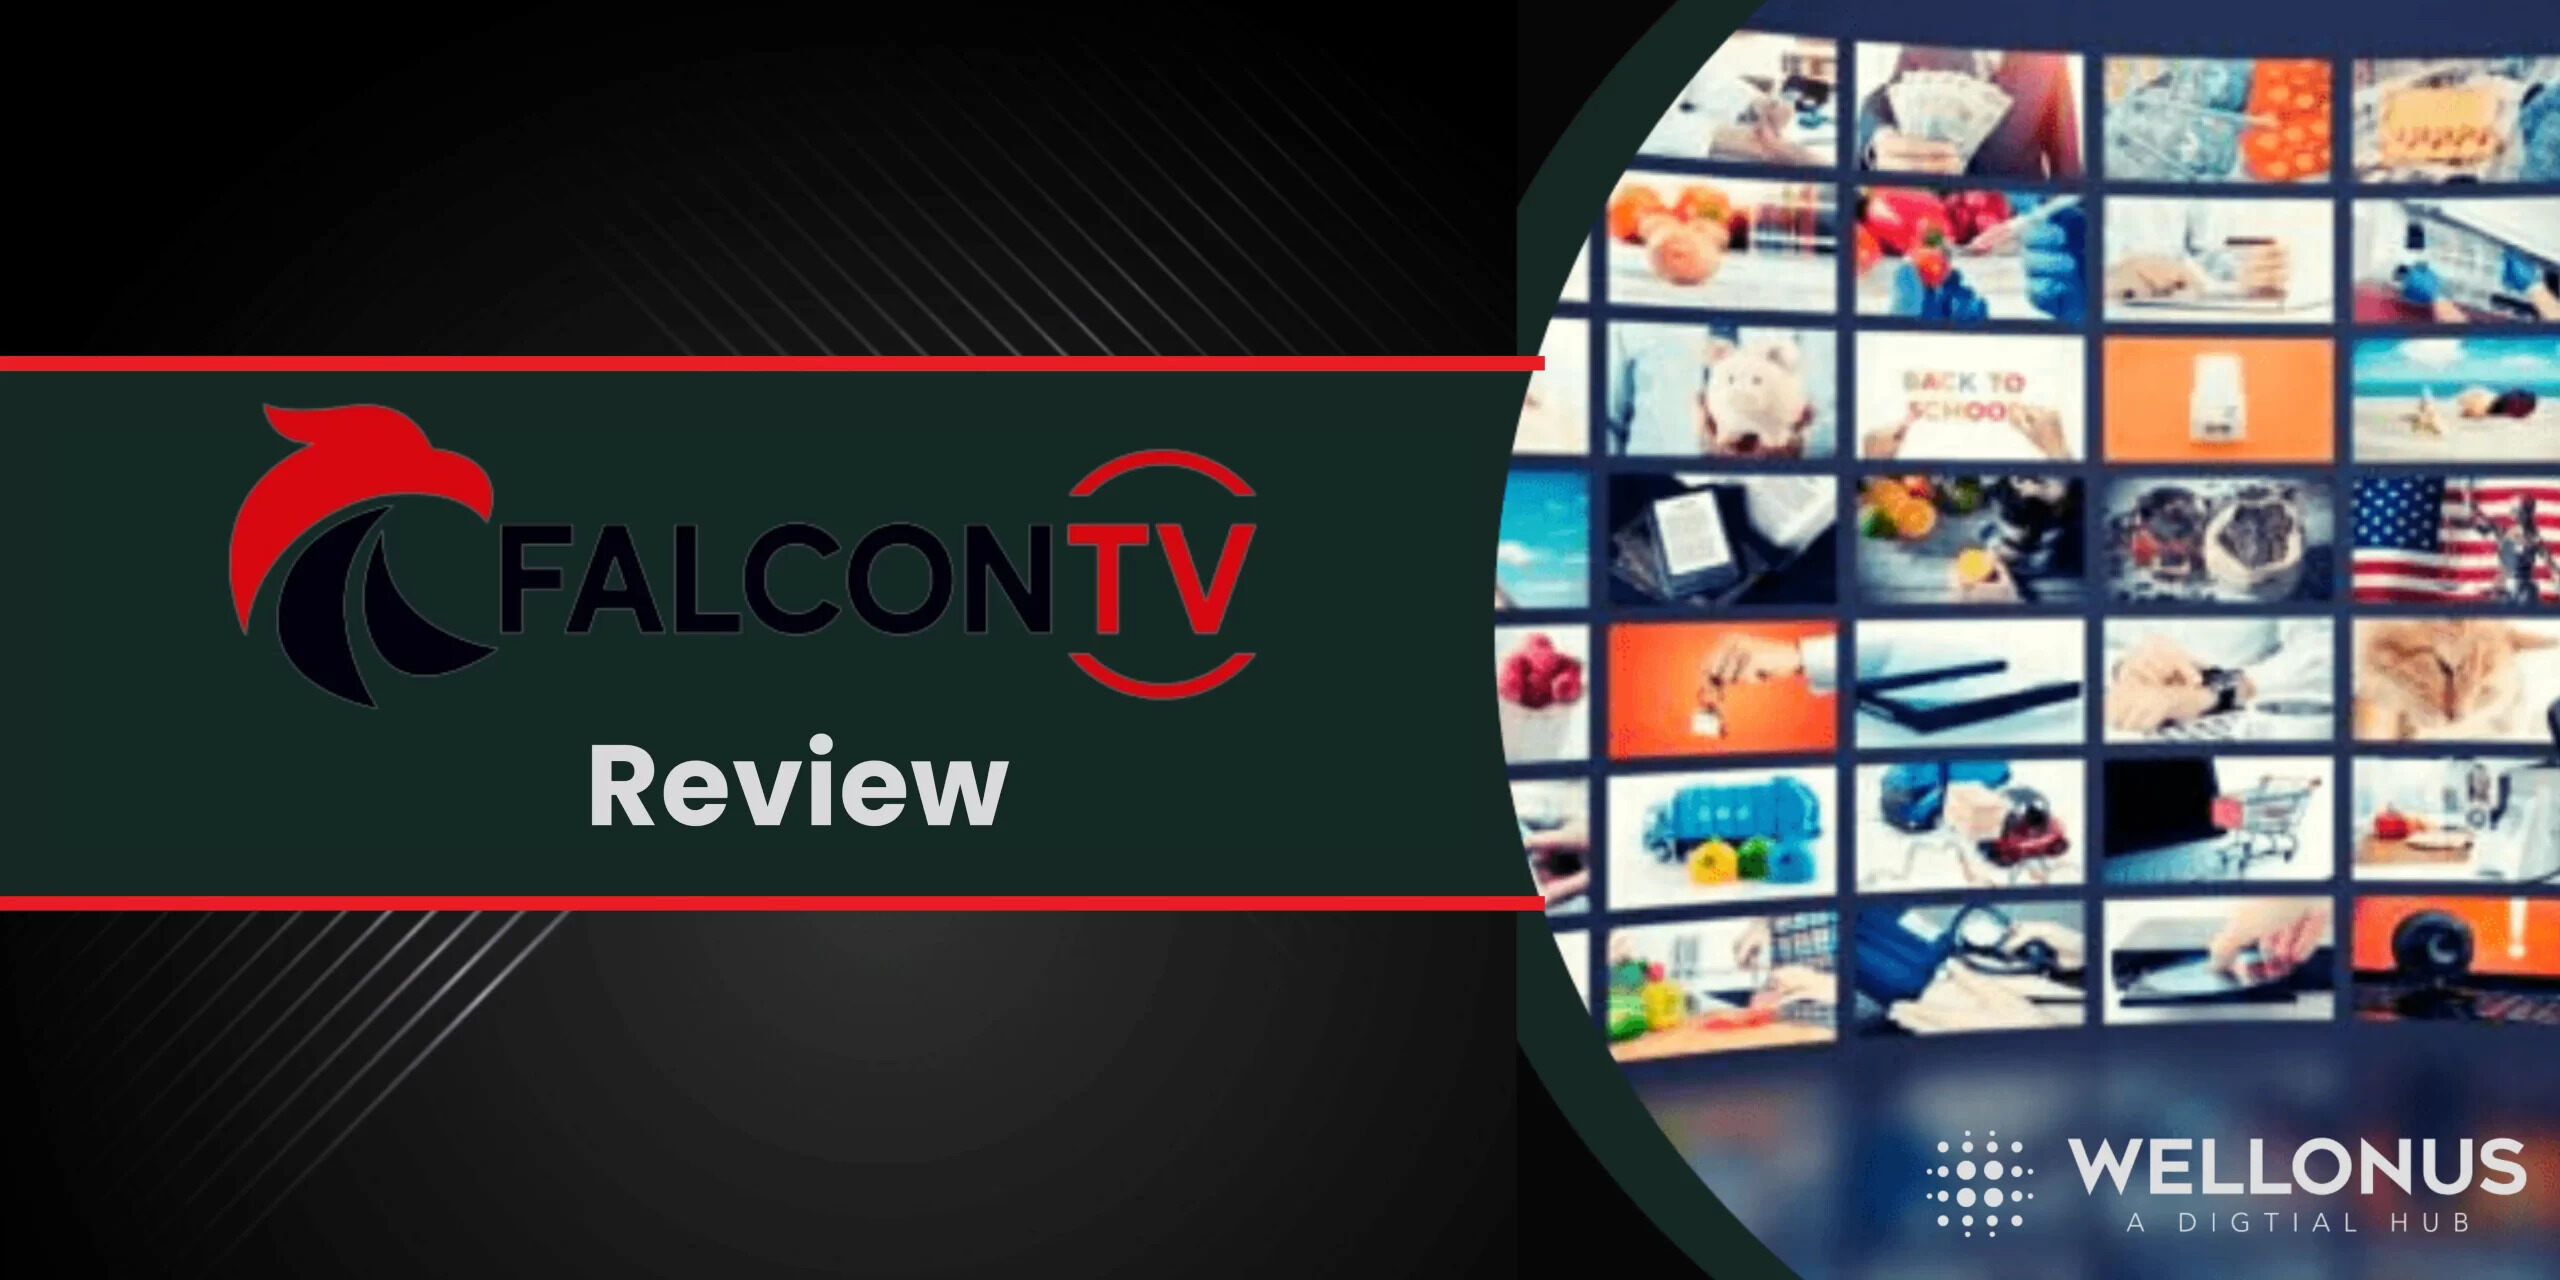 How To Download Falcon TV On Firestick